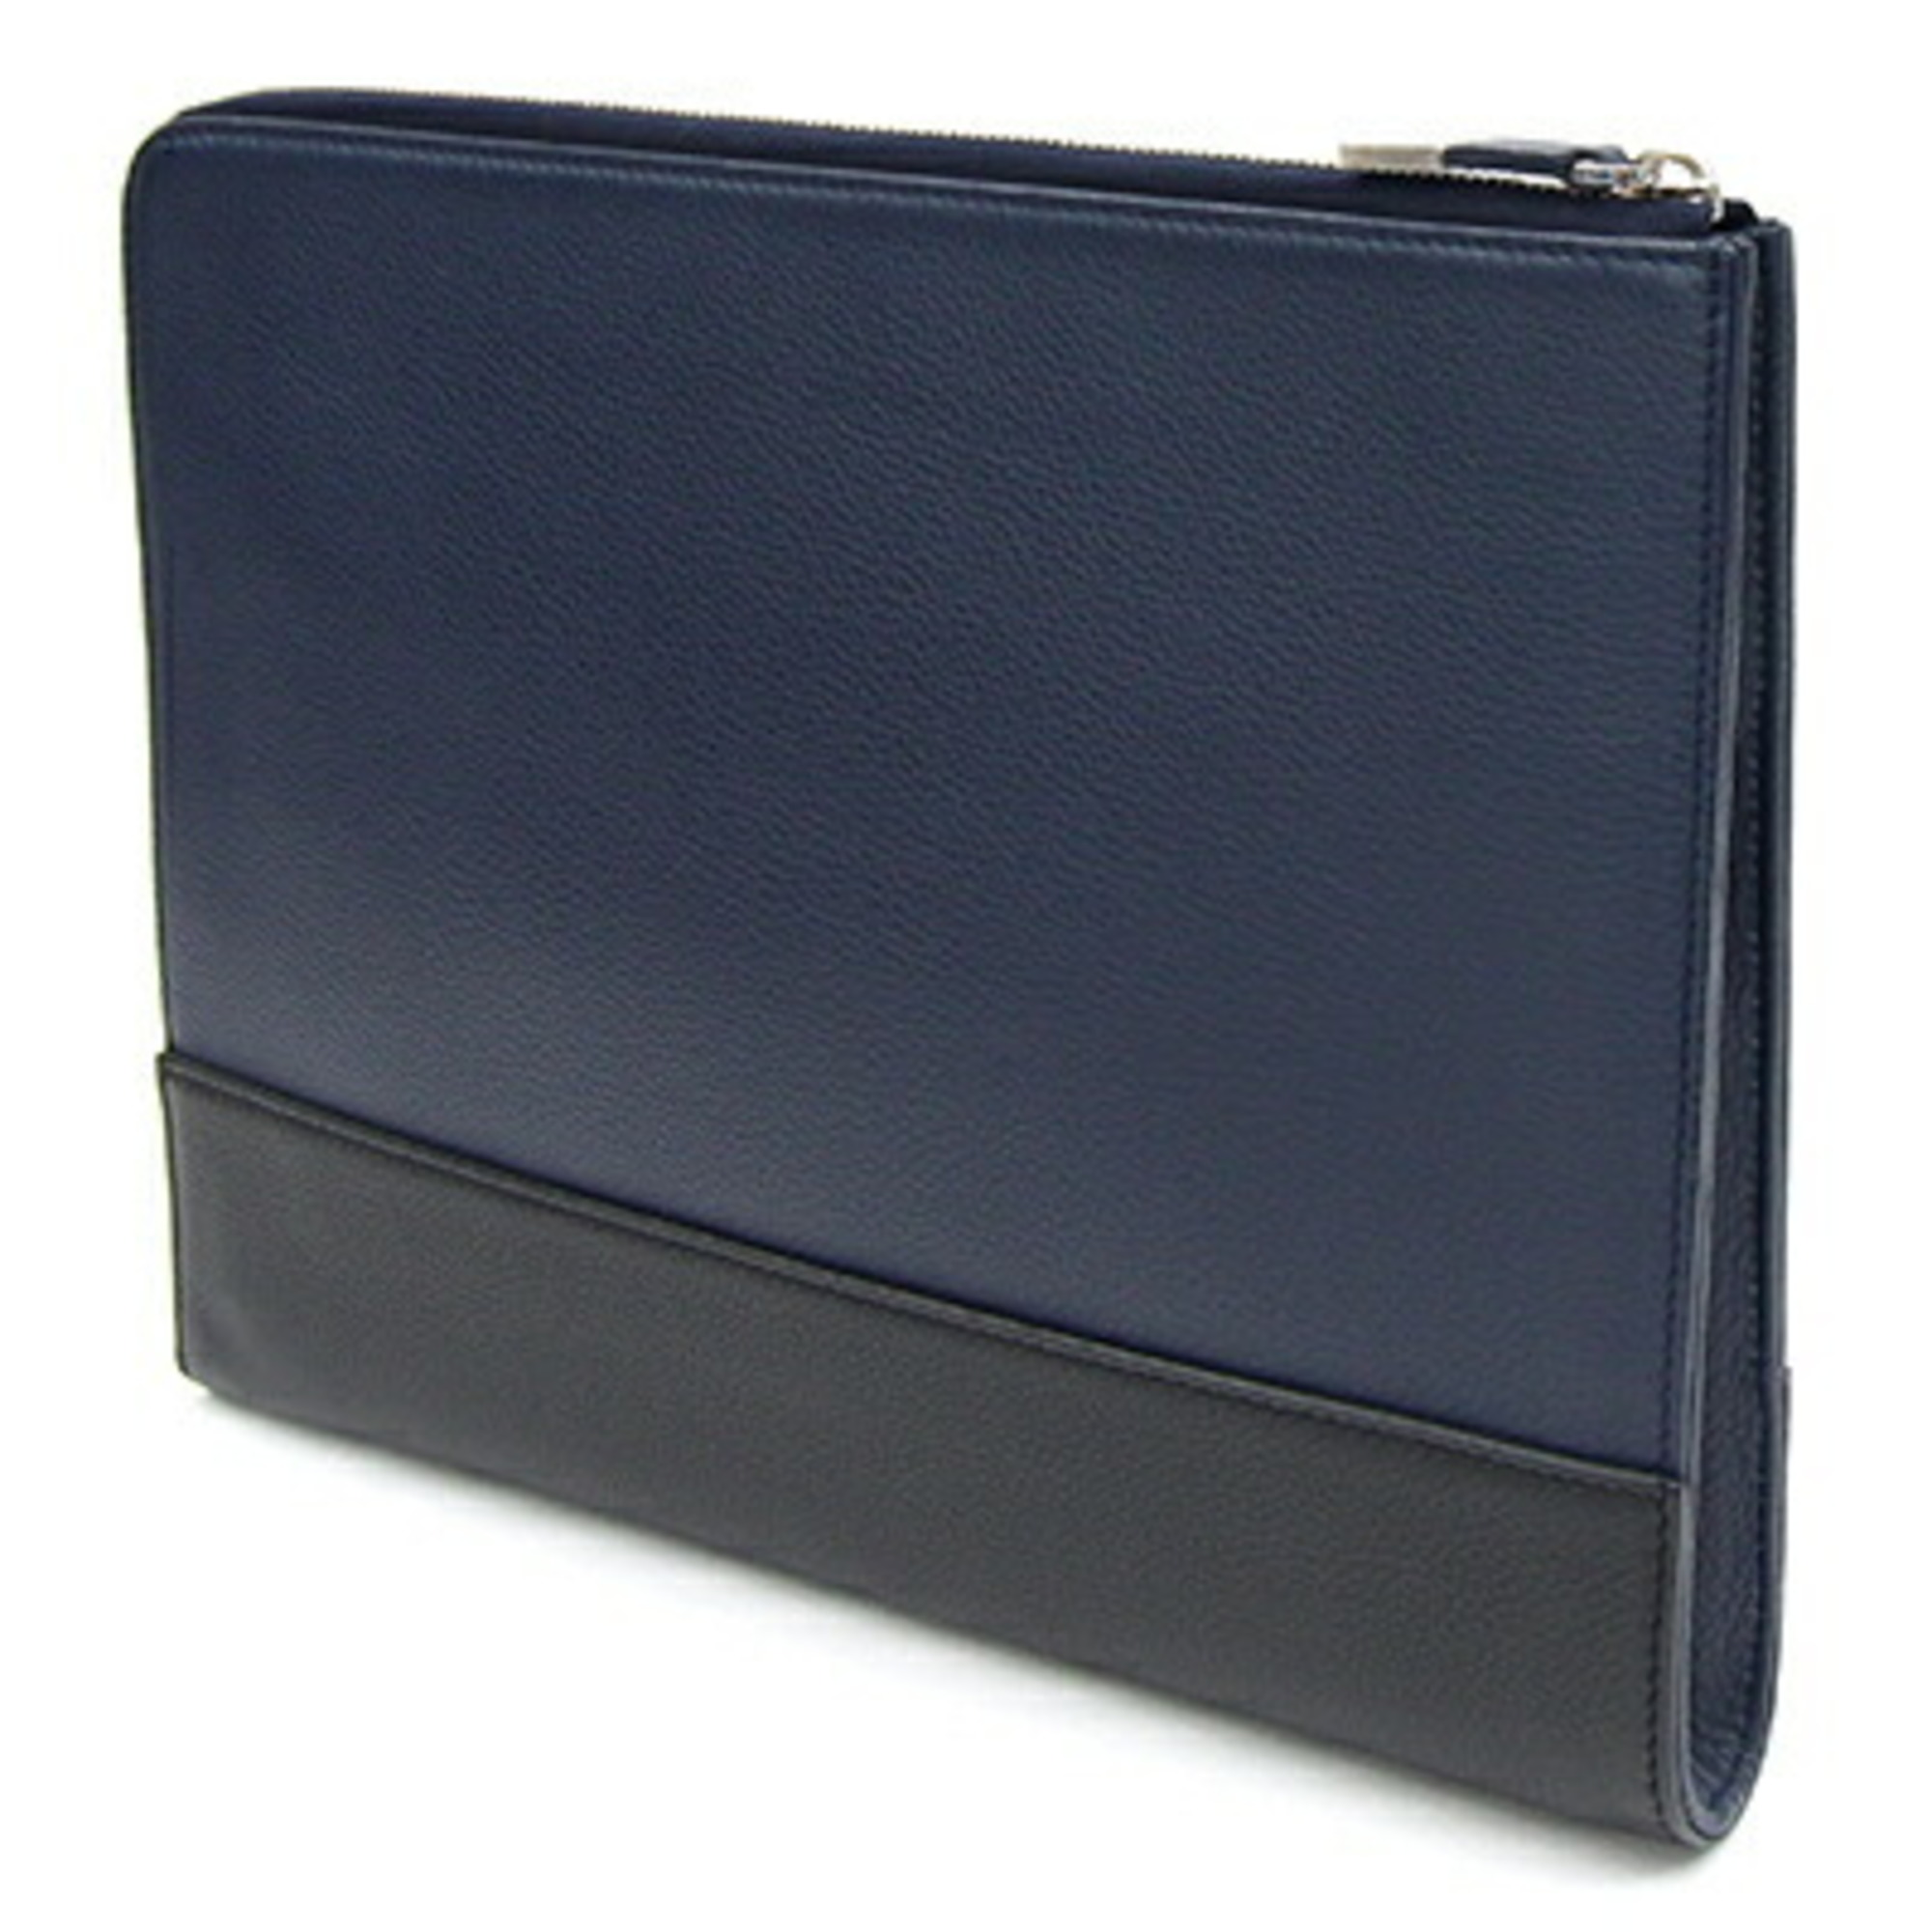 Dior Homme Clutch Bag Navy Black The L-Shaped Second Pouch Men's DIOR HOMME